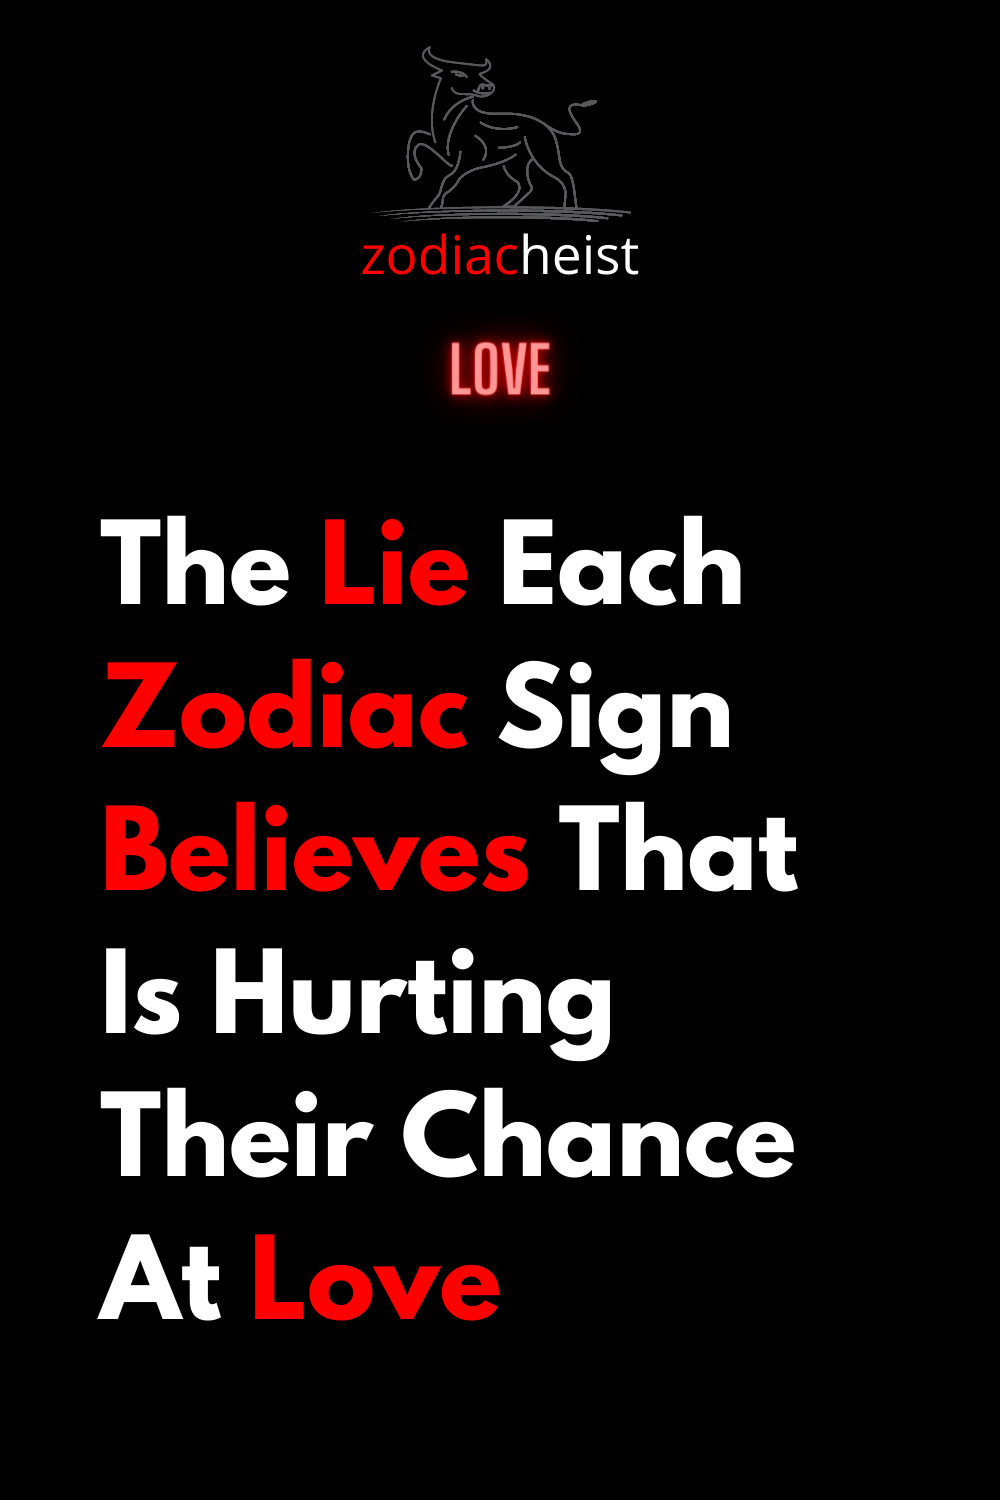 The Lie Each Zodiac Sign Believes That Is Hurting Their Chance At Love